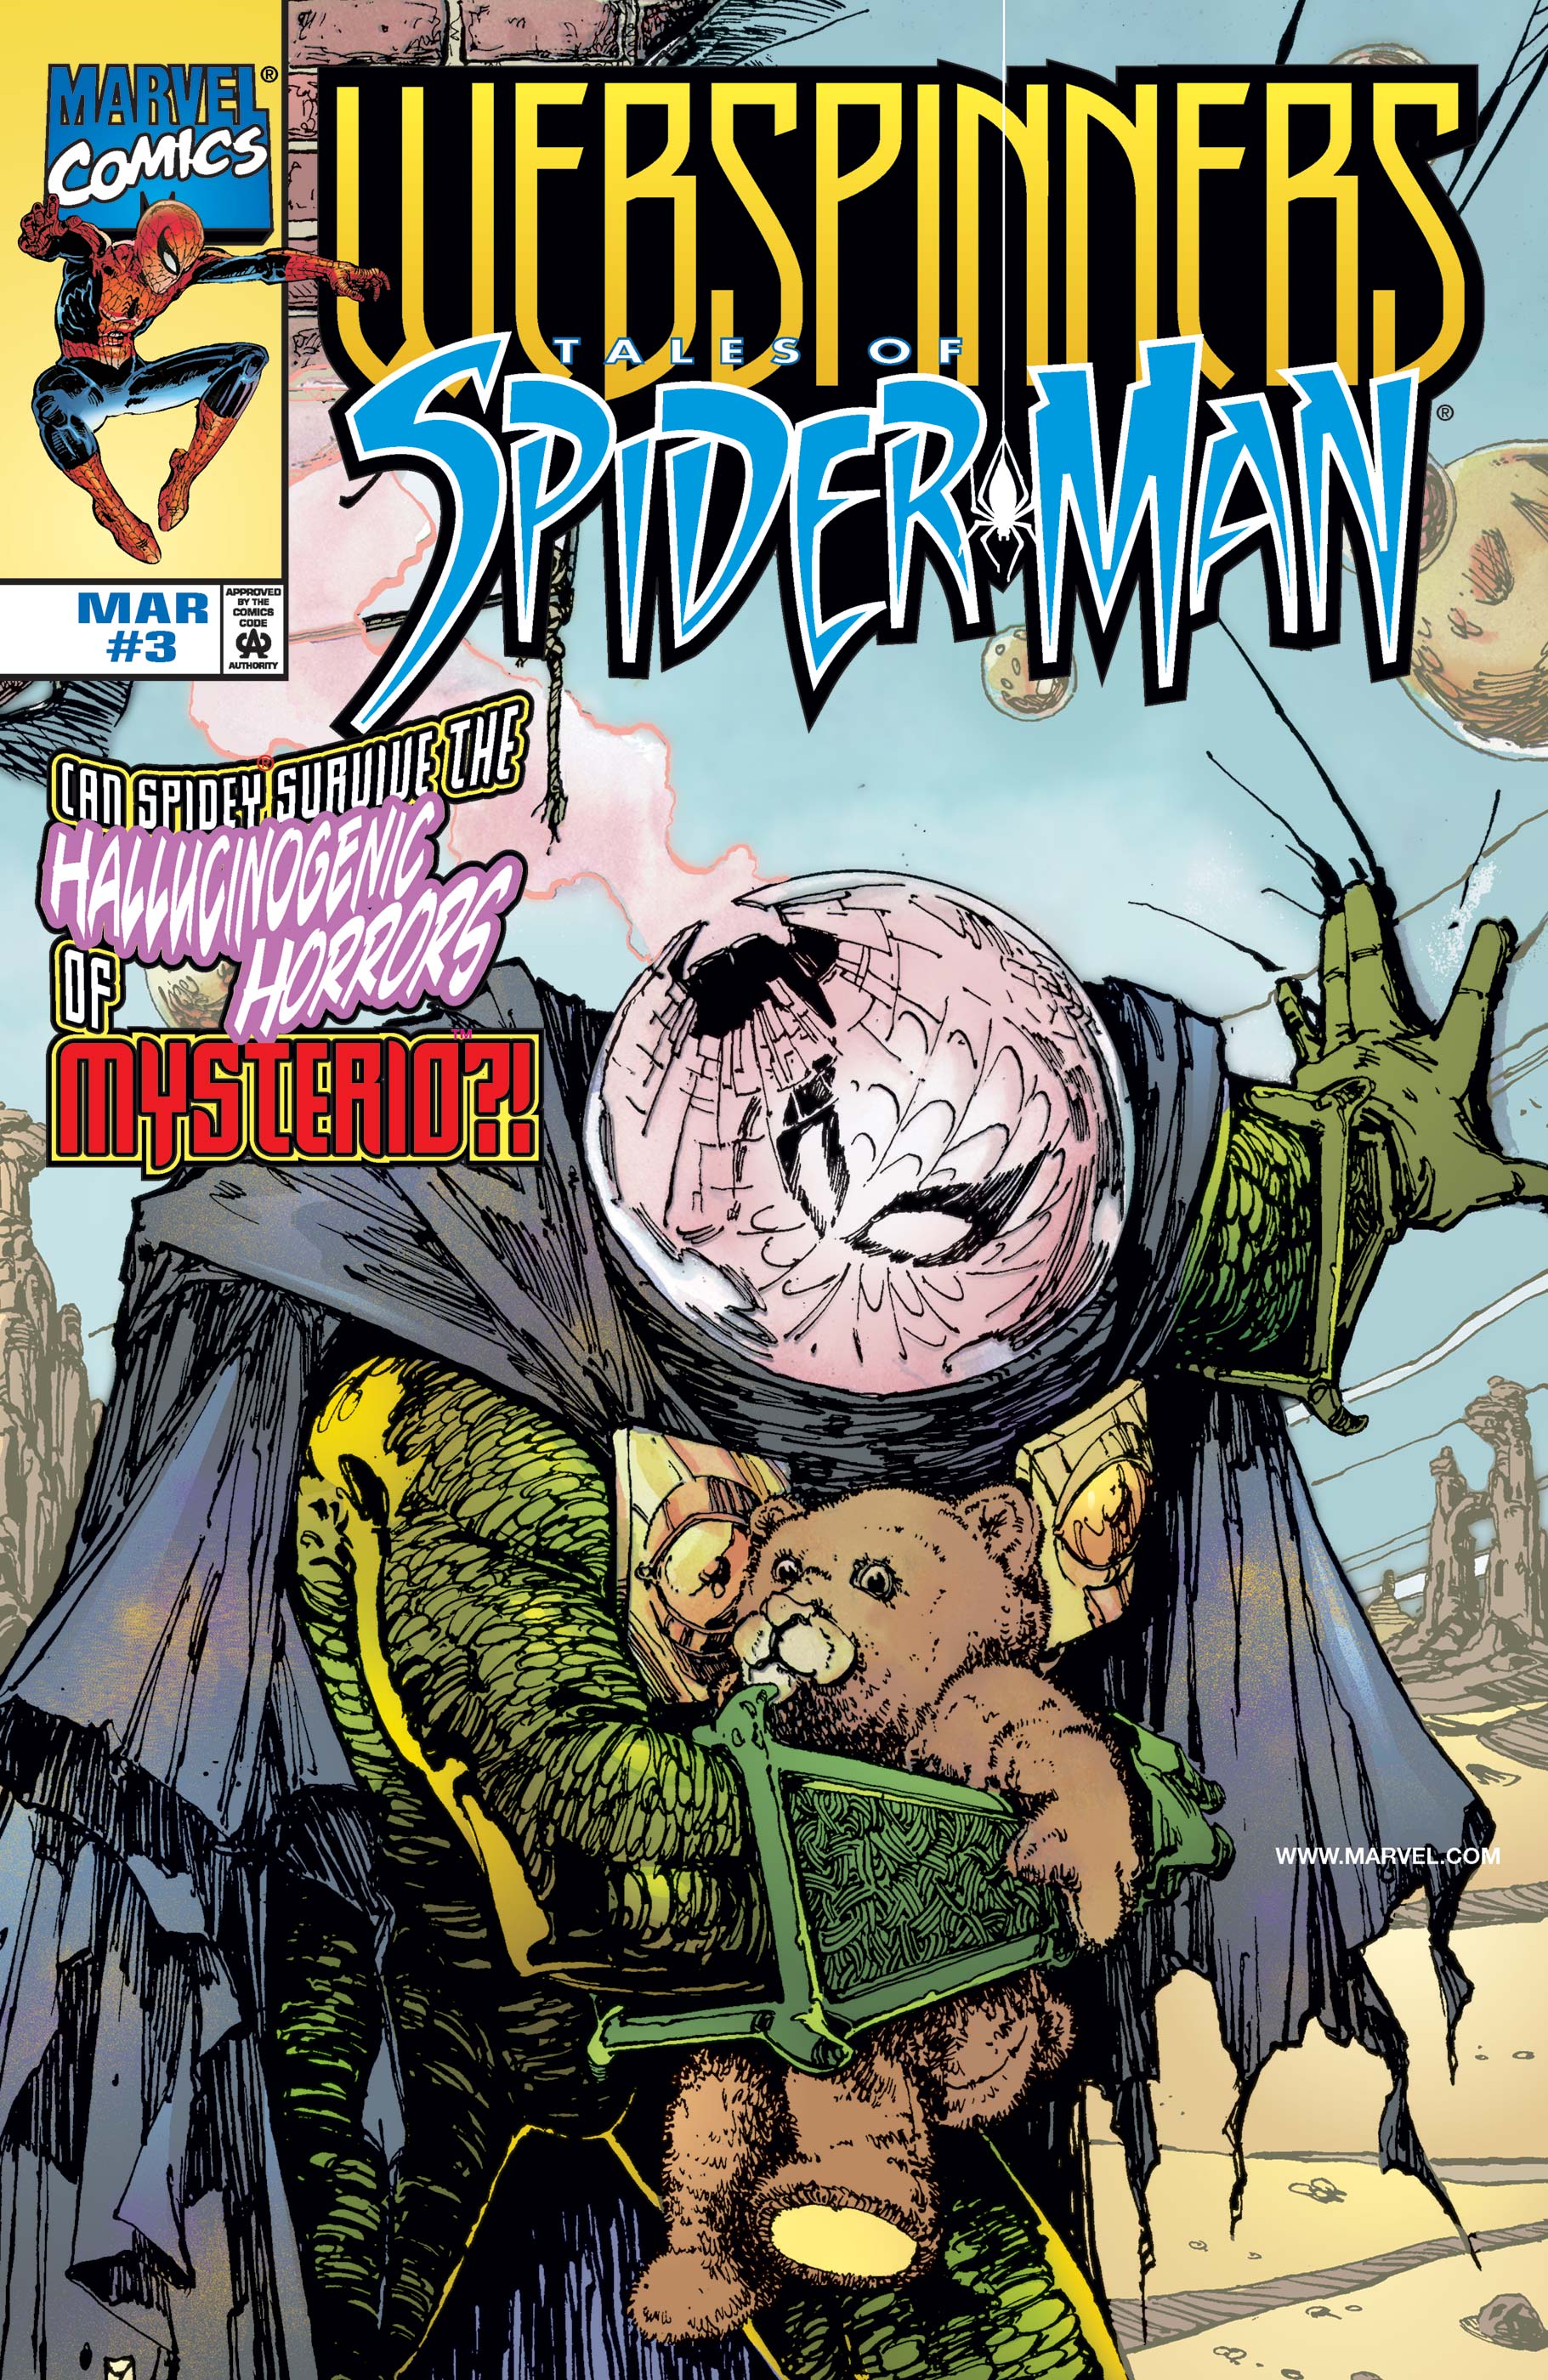 Webspinners: Tales of Spider-Man (1999) #3